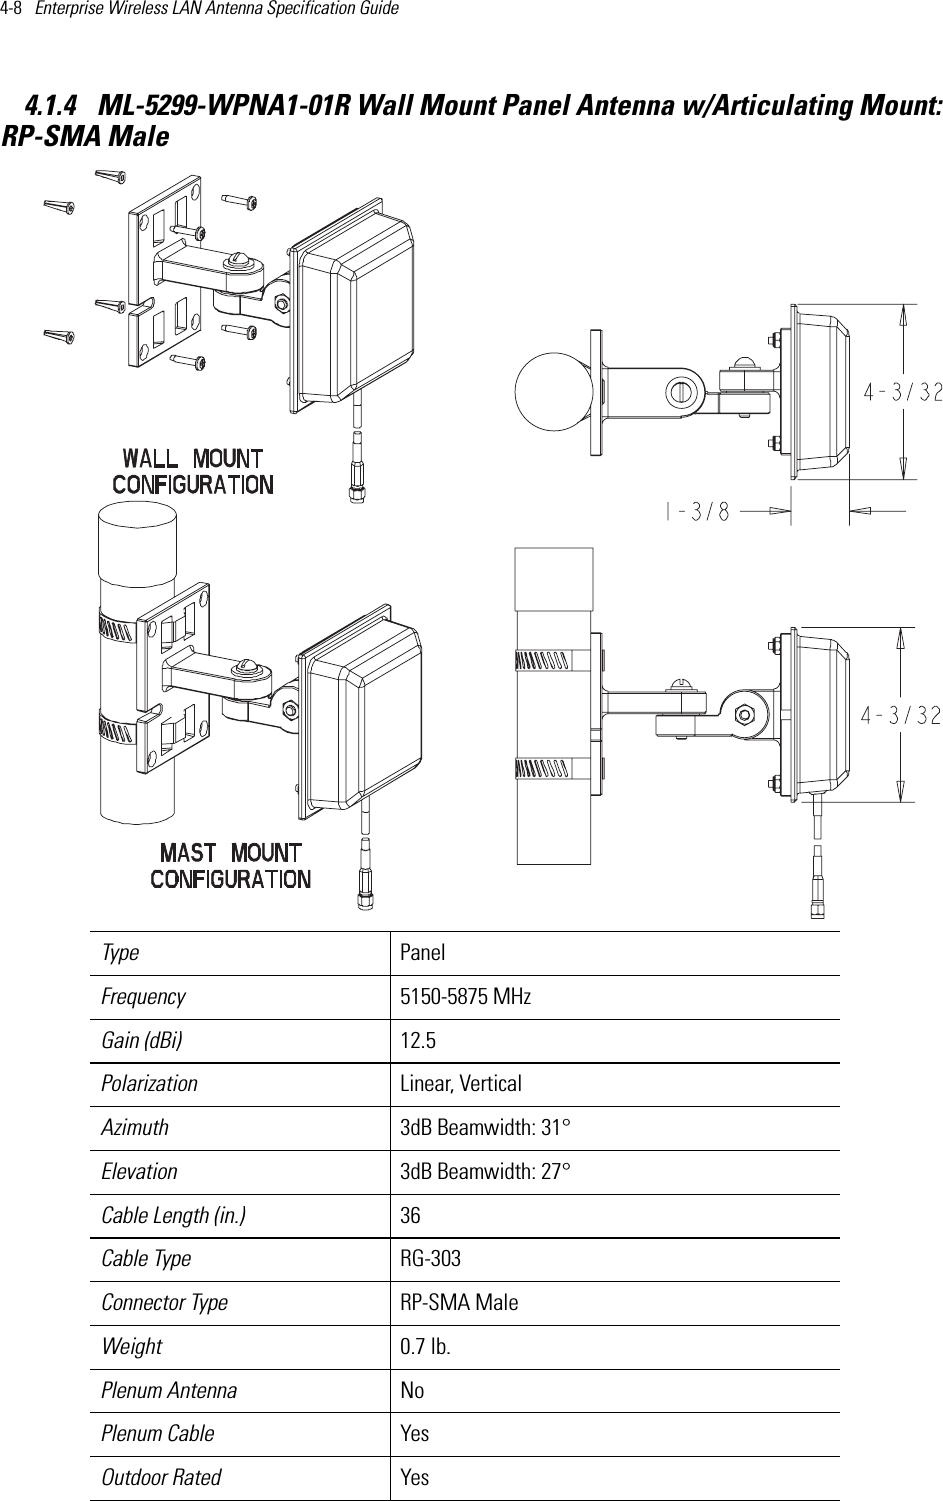 4-8   Enterprise Wireless LAN Antenna Specification Guide 4.1.4  ML-5299-WPNA1-01R Wall Mount Panel Antenna w/Articulating Mount:RP-SMA Male Type PanelFrequency 5150-5875 MHzGain (dBi) 12.5Polarization Linear, VerticalAzimuth 3dB Beamwidth: 31°Elevation 3dB Beamwidth: 27°Cable Length (in.) 36Cable Type RG-303Connector Type RP-SMA MaleWeight 0.7 lb.Plenum Antenna NoPlenum Cable YesOutdoor Rated Yes